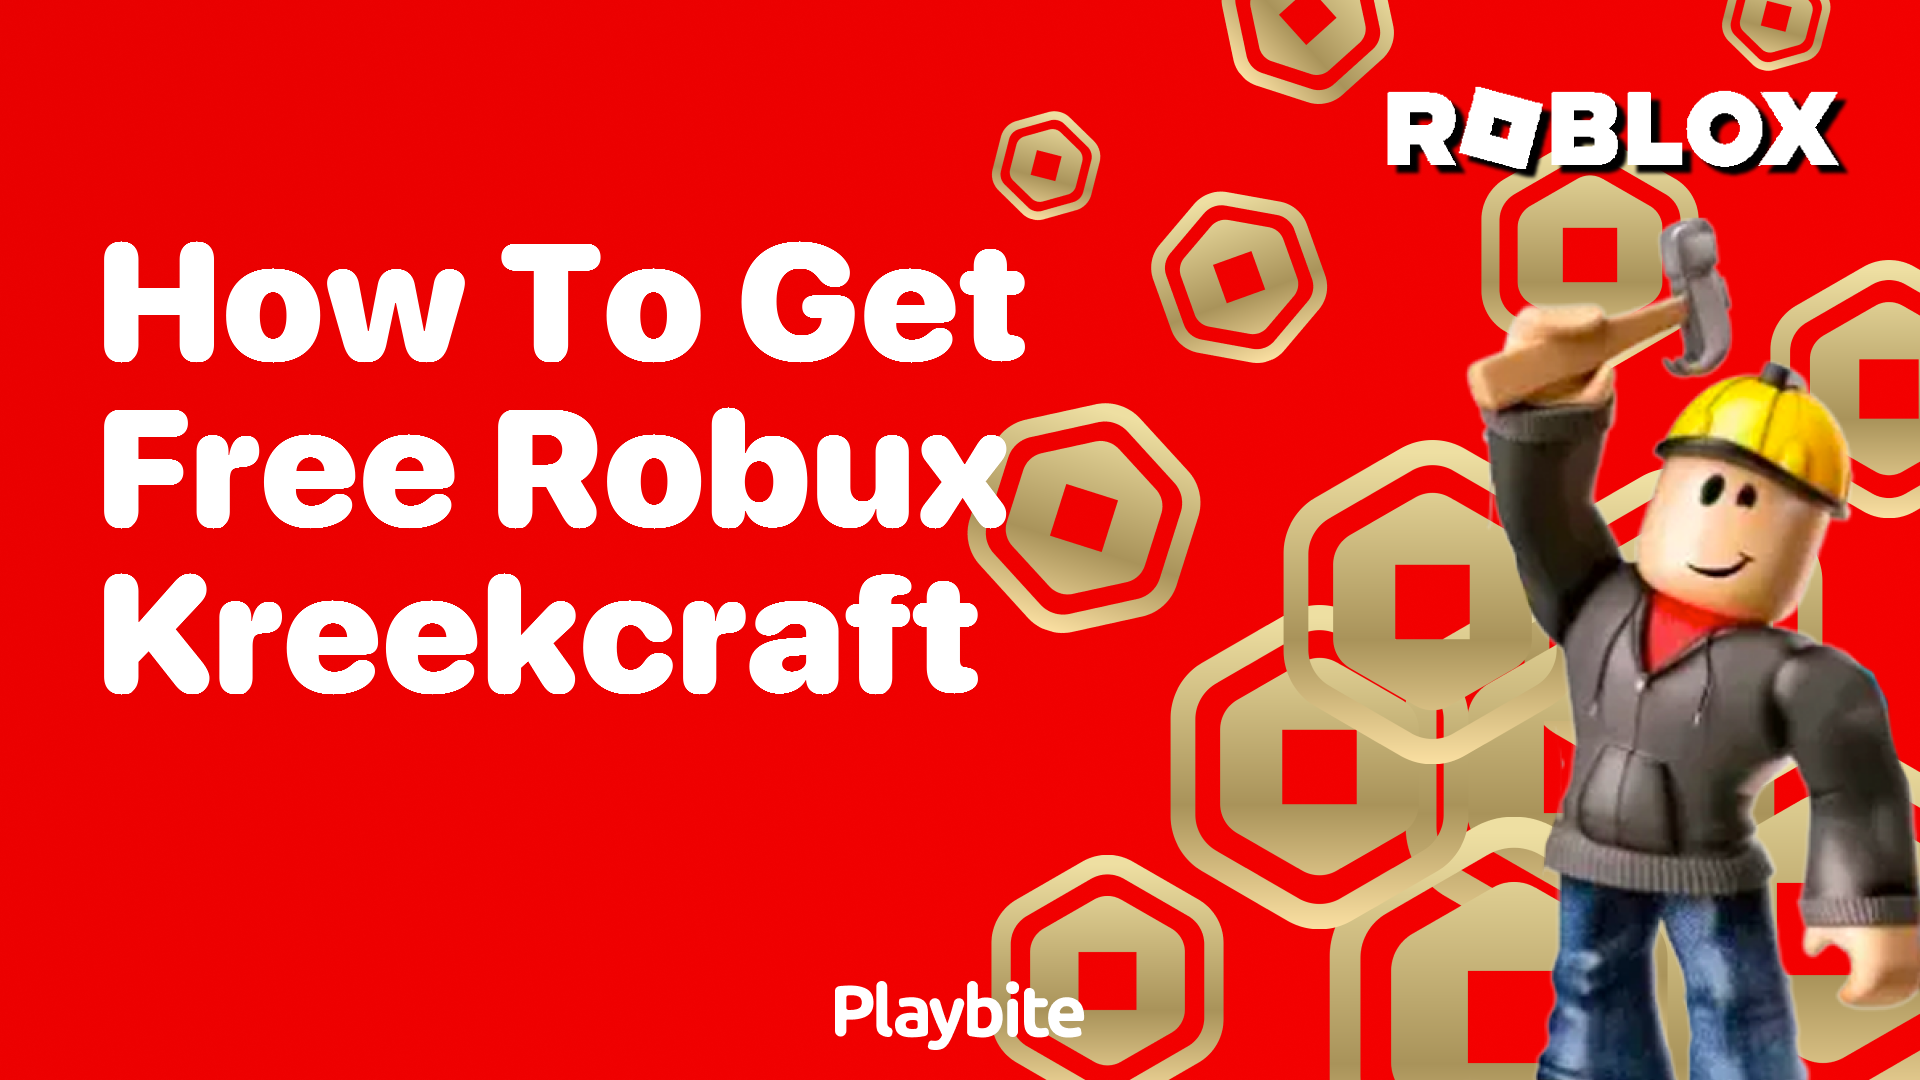 How to Get Free Robux: Insights from KreekCraft